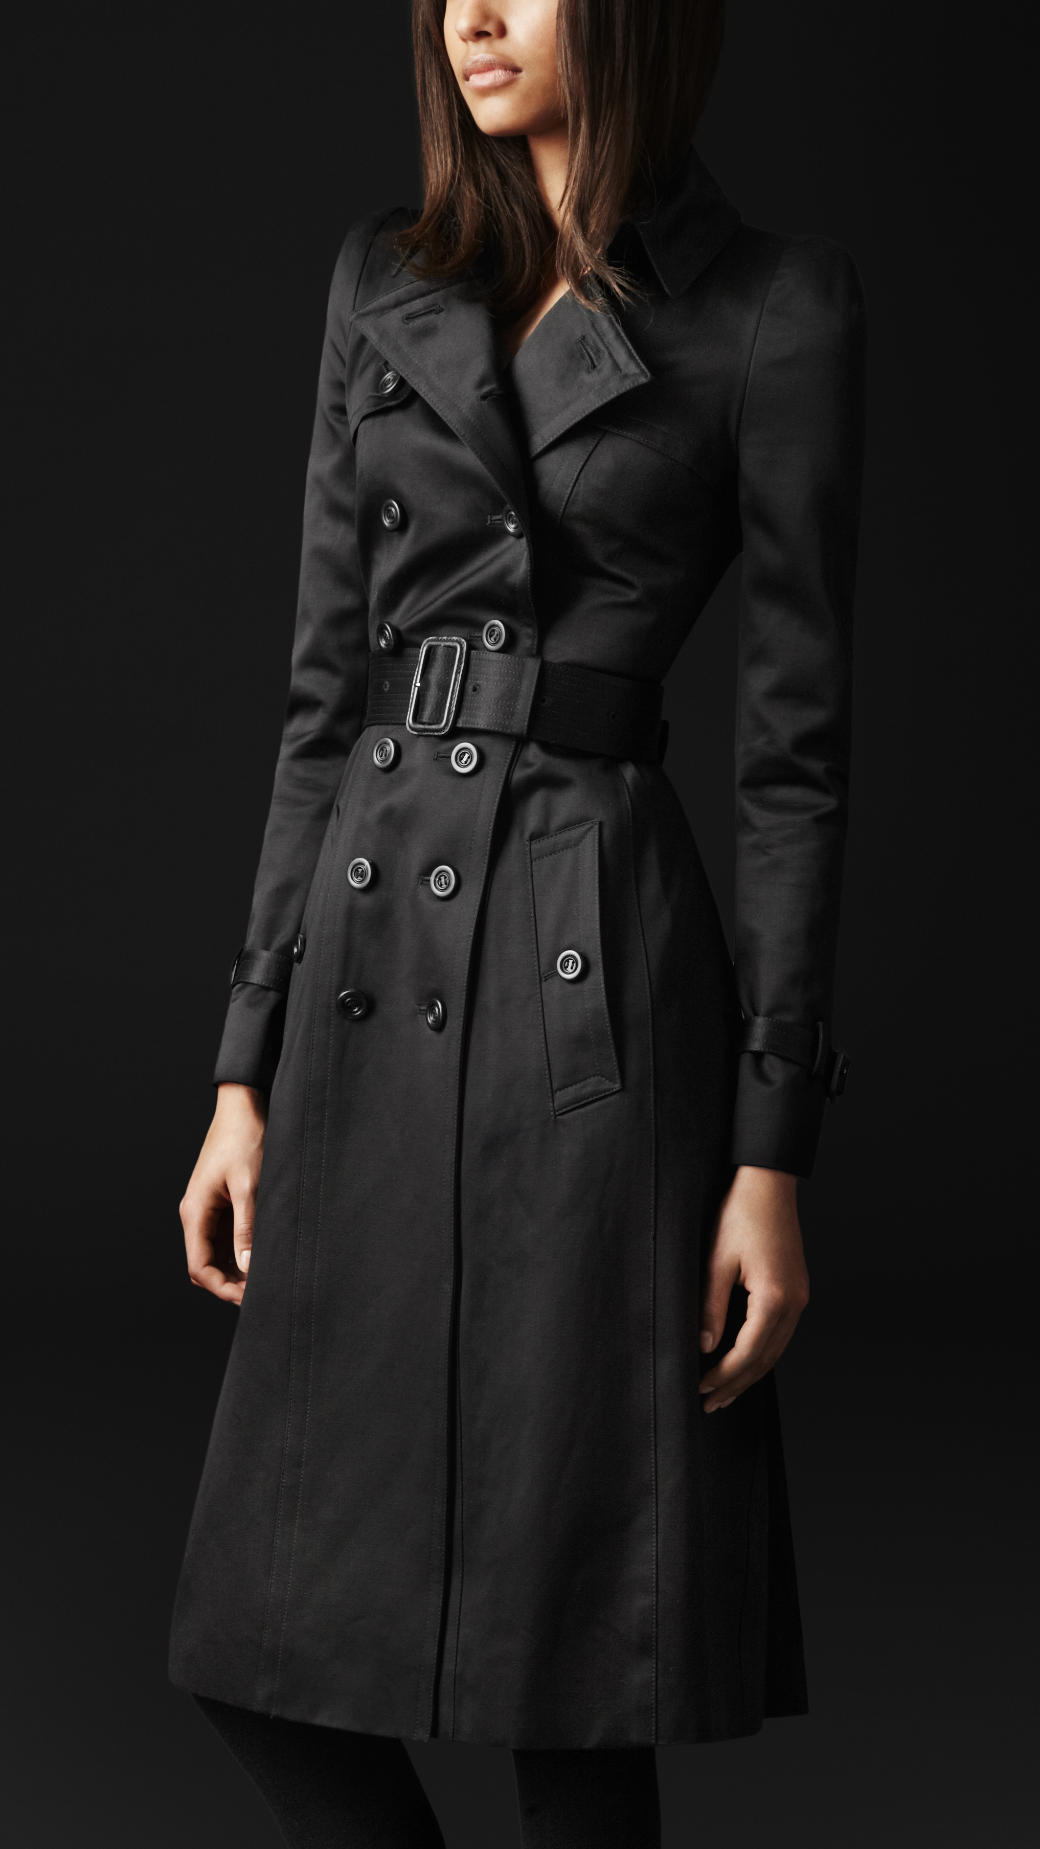 Lyst - Burberry Prorsum Cotton Sateen Bow Detail Trench Coat in Black